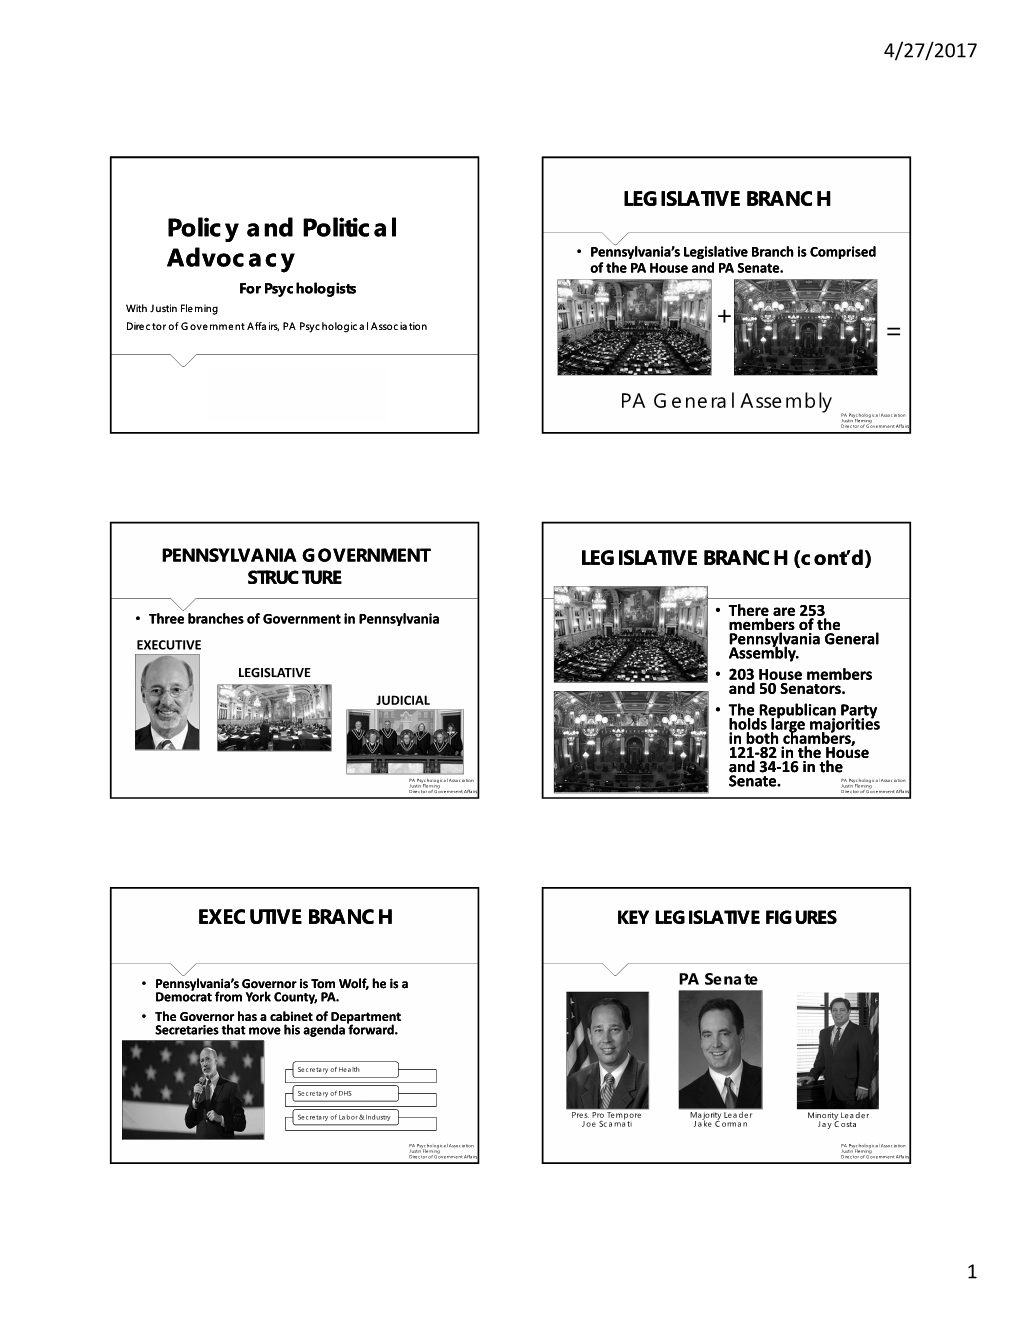 Policy and Political Advocacy Policy and Political Advocacy